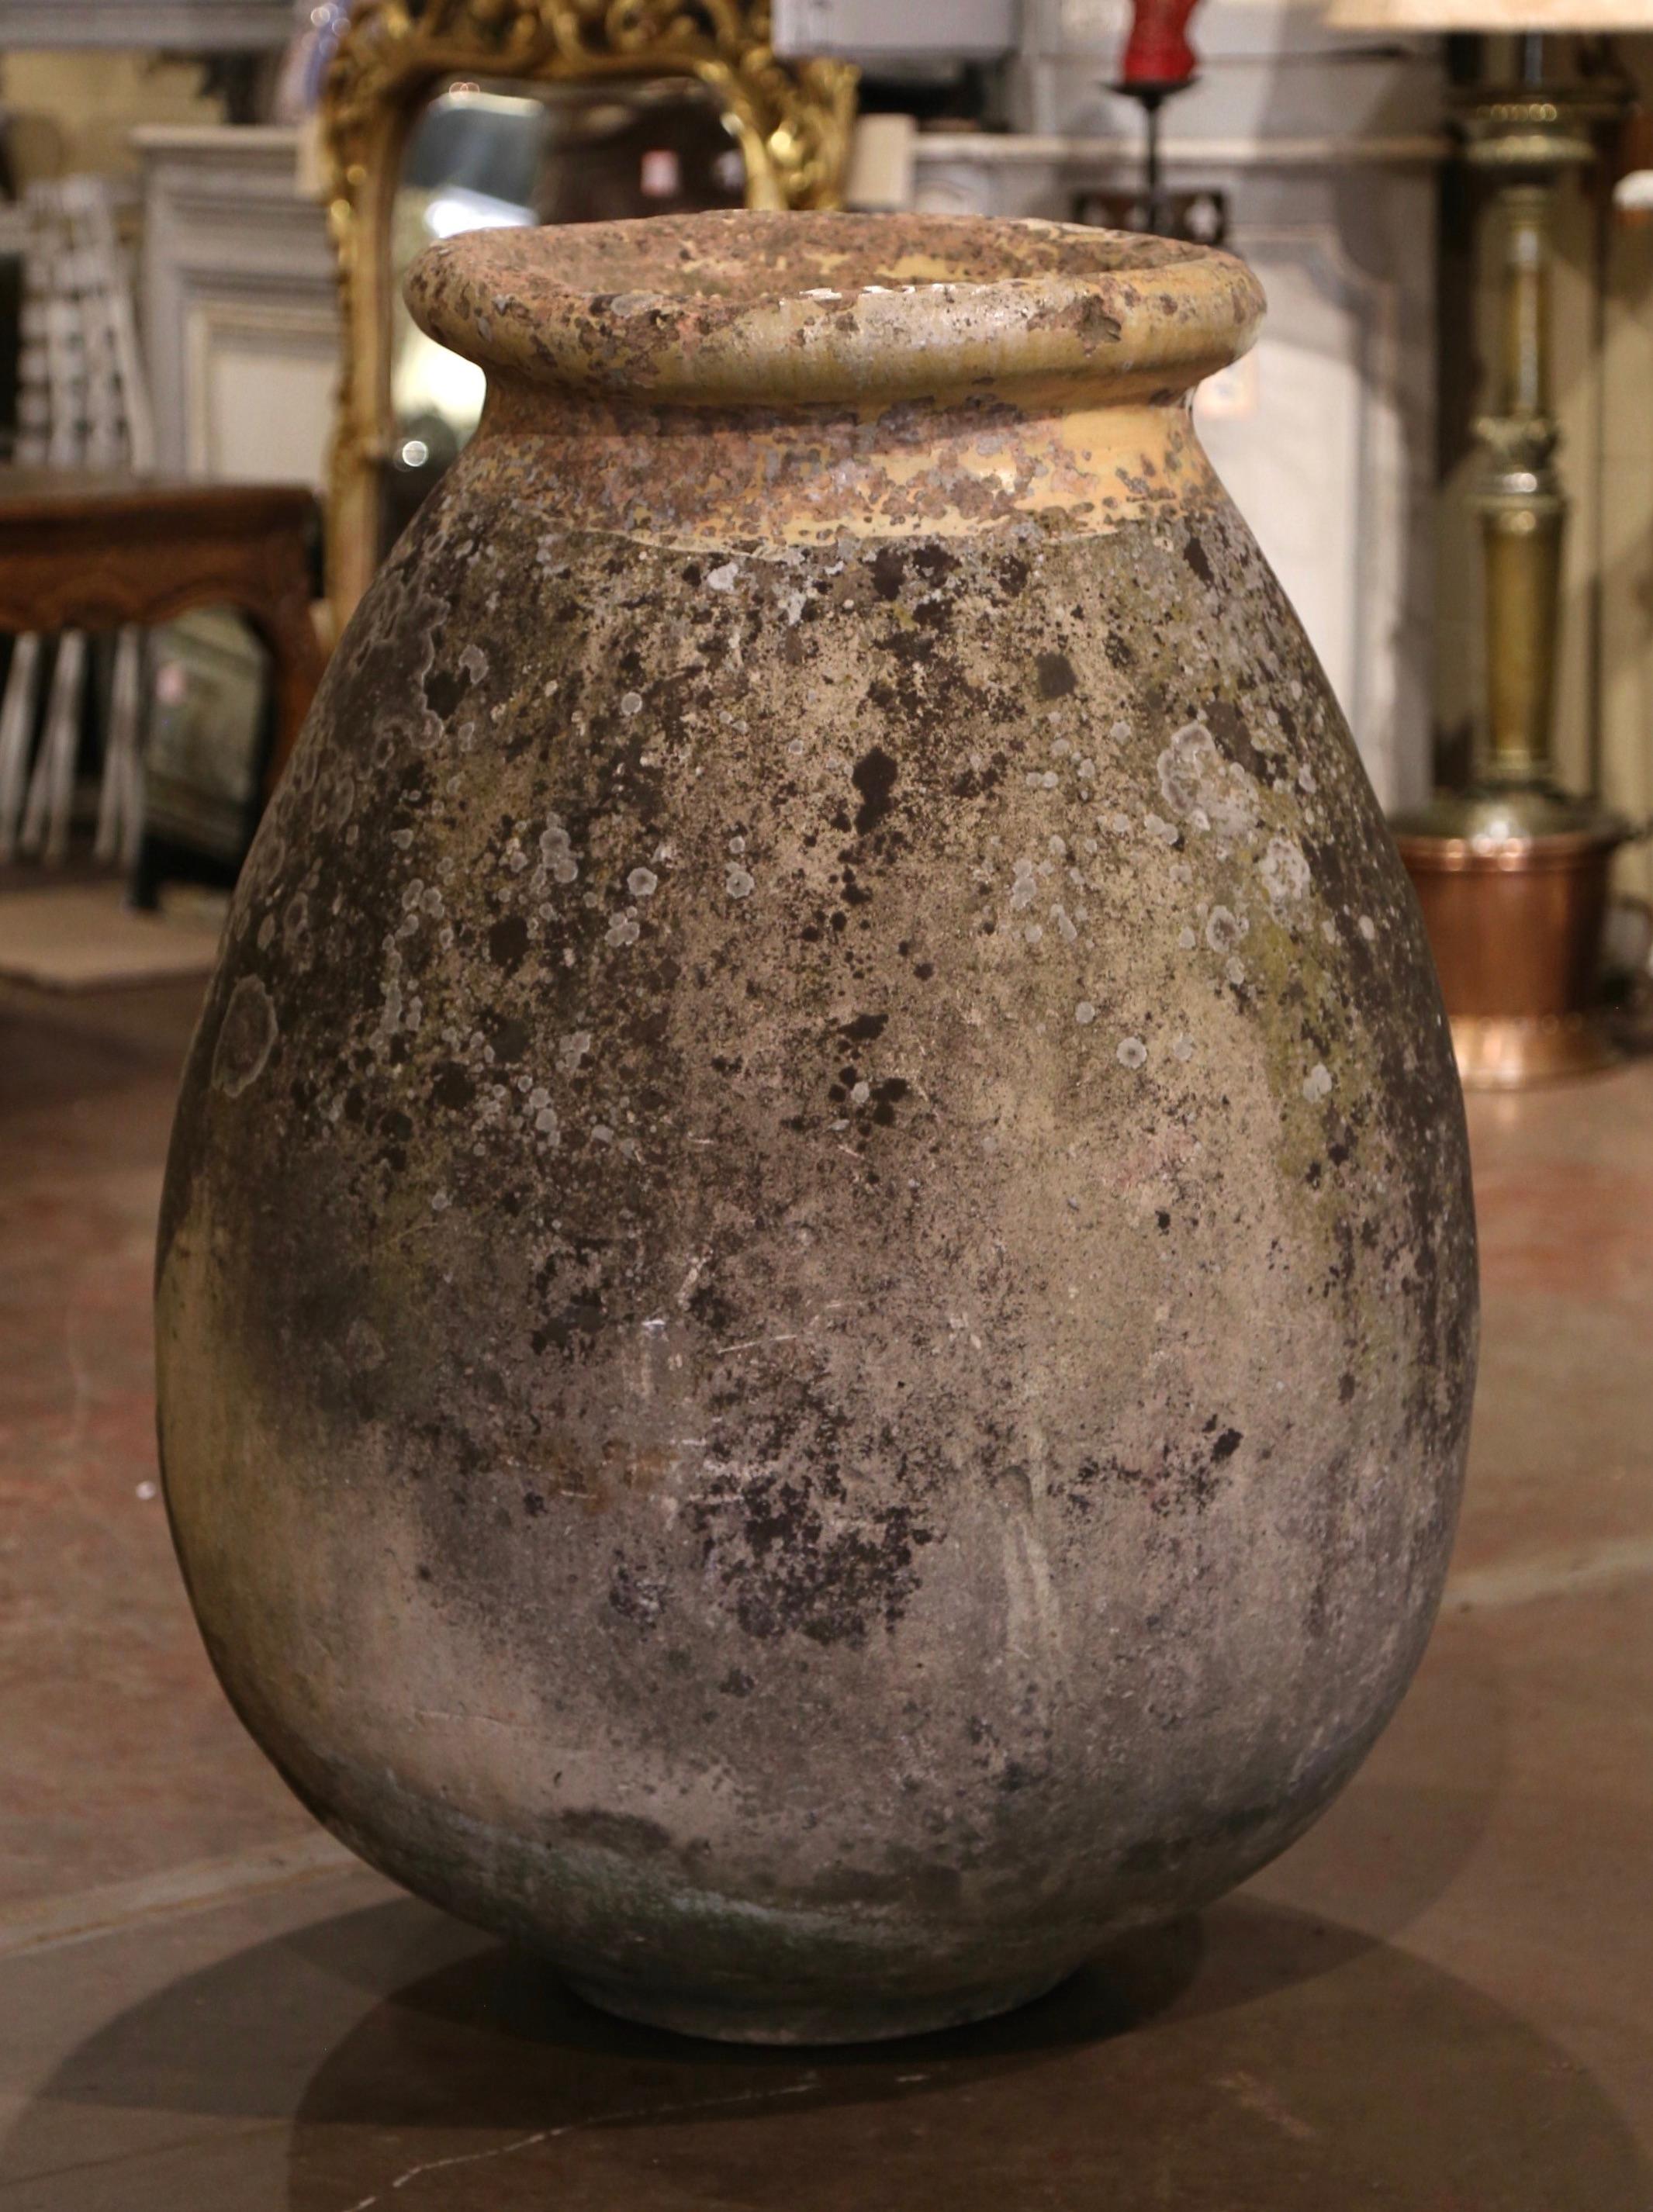 This large, antique earthenware olive jar was created in Biot, Southern France, circa 1760. Made of blond clay and neutral in color, the terracotta vase has a traditional round bulbous shape. The rustic, time-worn pot features a pale ochre glaze